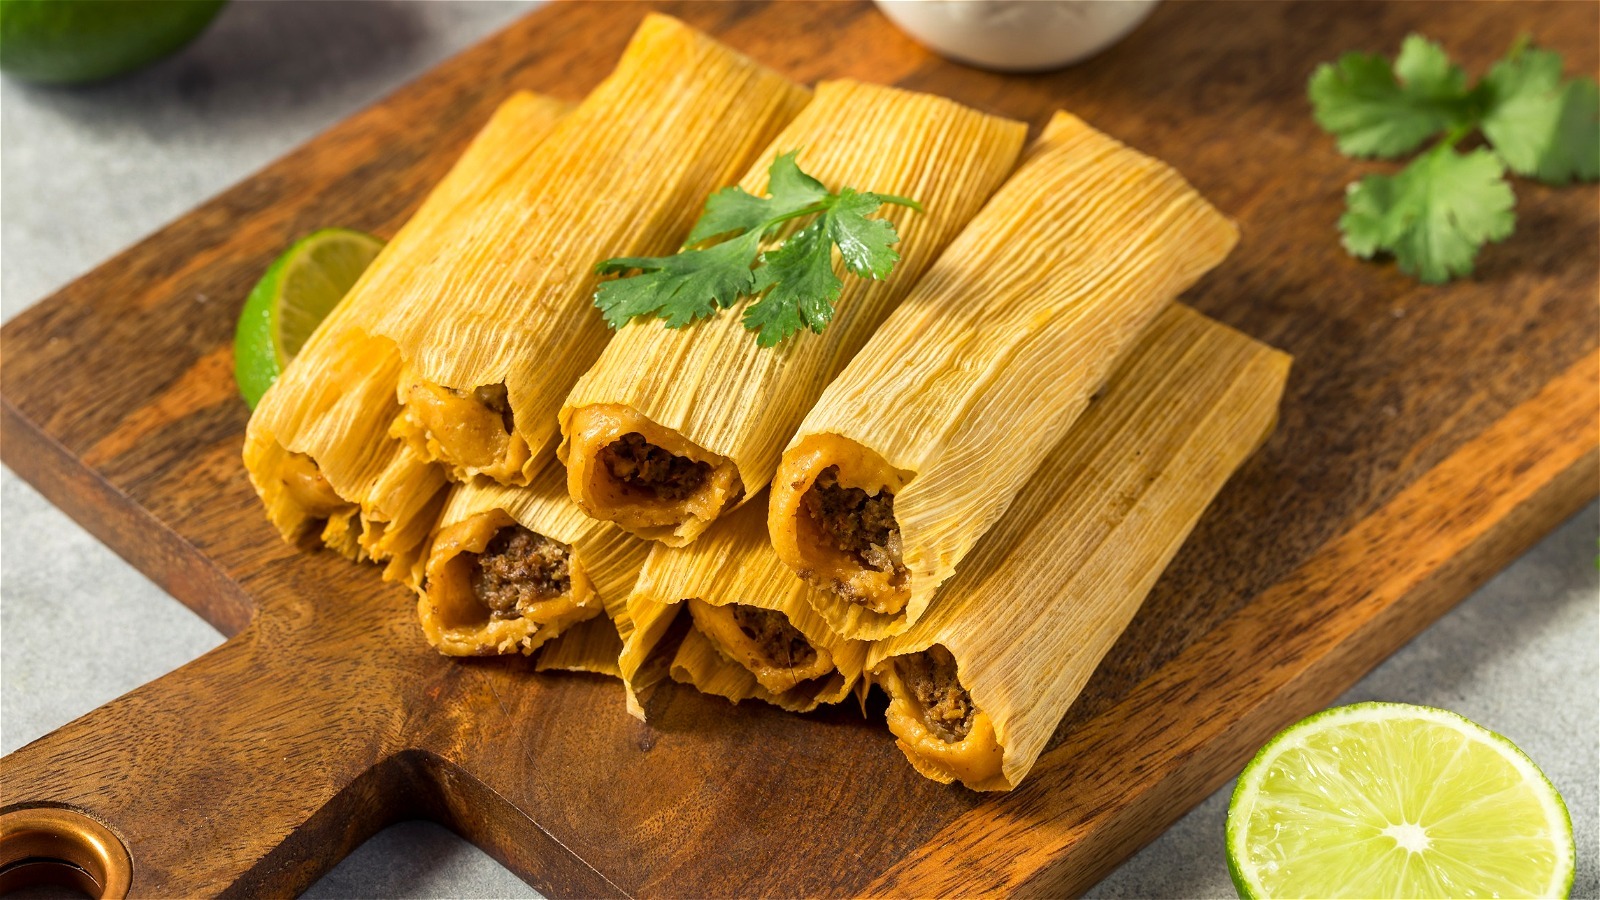 Del Taco's Tamale Menu Has Arrived For The Holiday Season